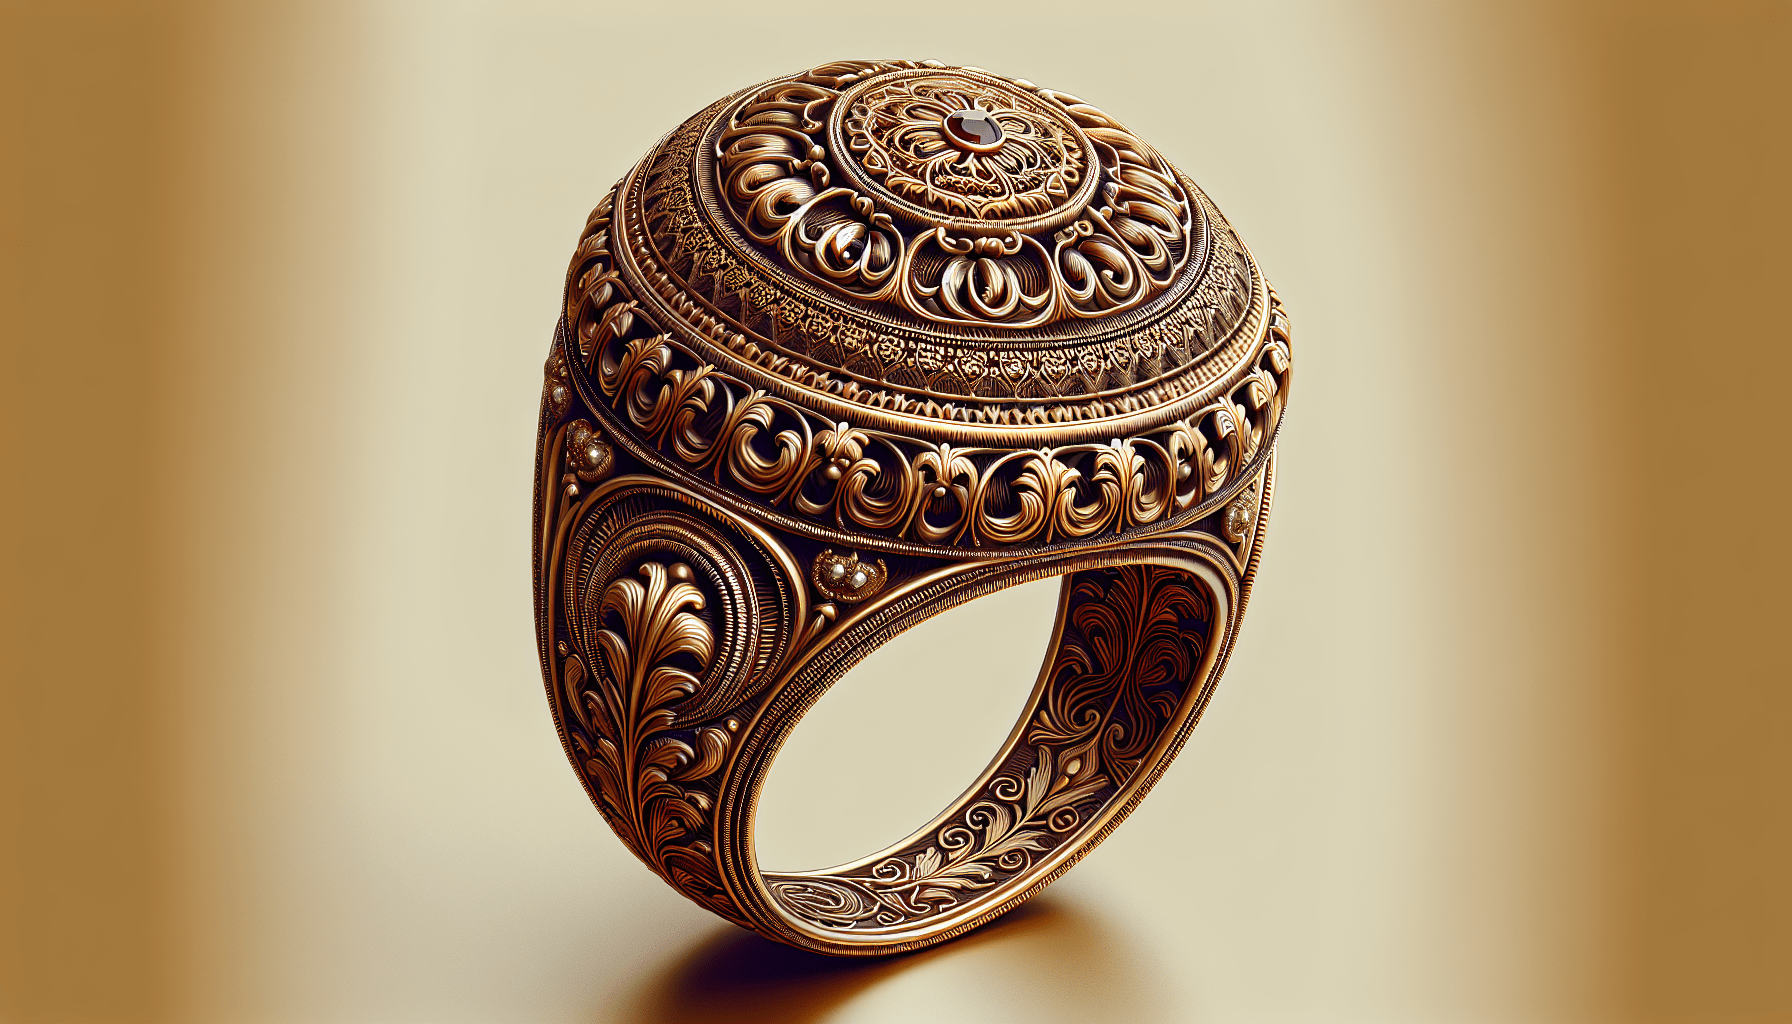 Ornate gold ring with intricate swirling patterns inspired by traditional Turkish motifs, and detailed engravings on the band and the top.